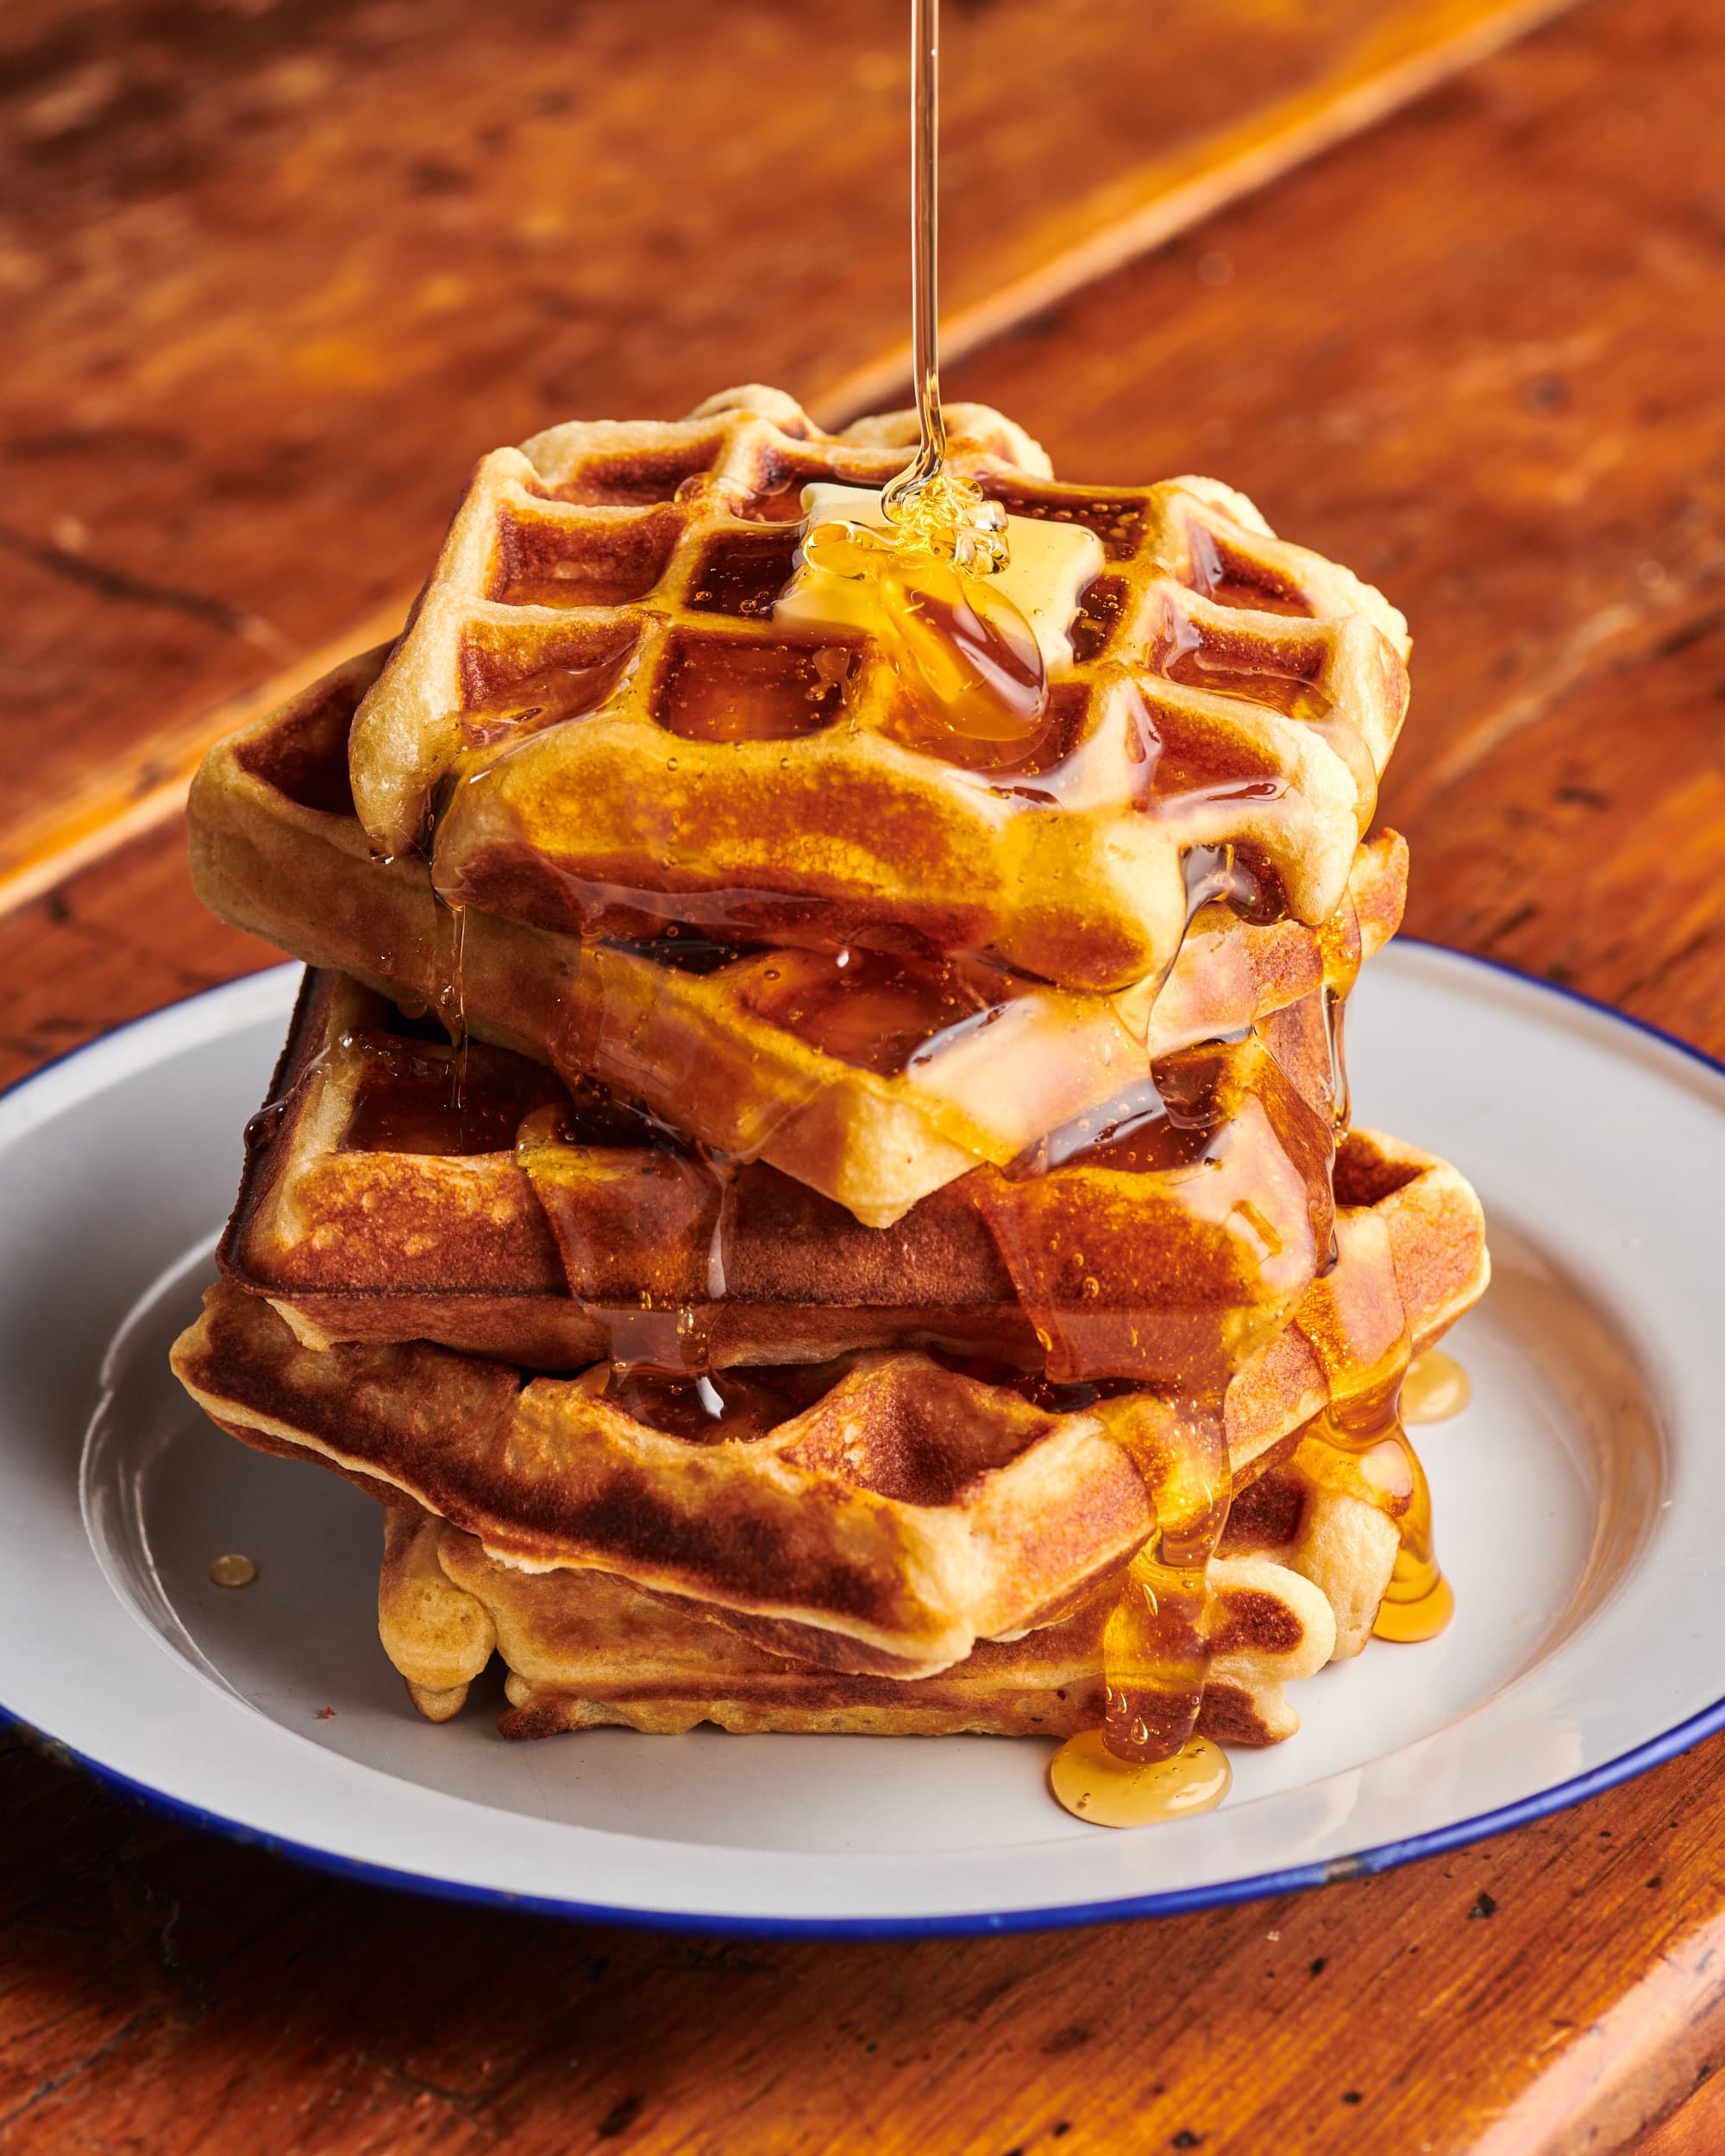 Thin, Crispy, American (Non-Belgian) Waffles are REAL